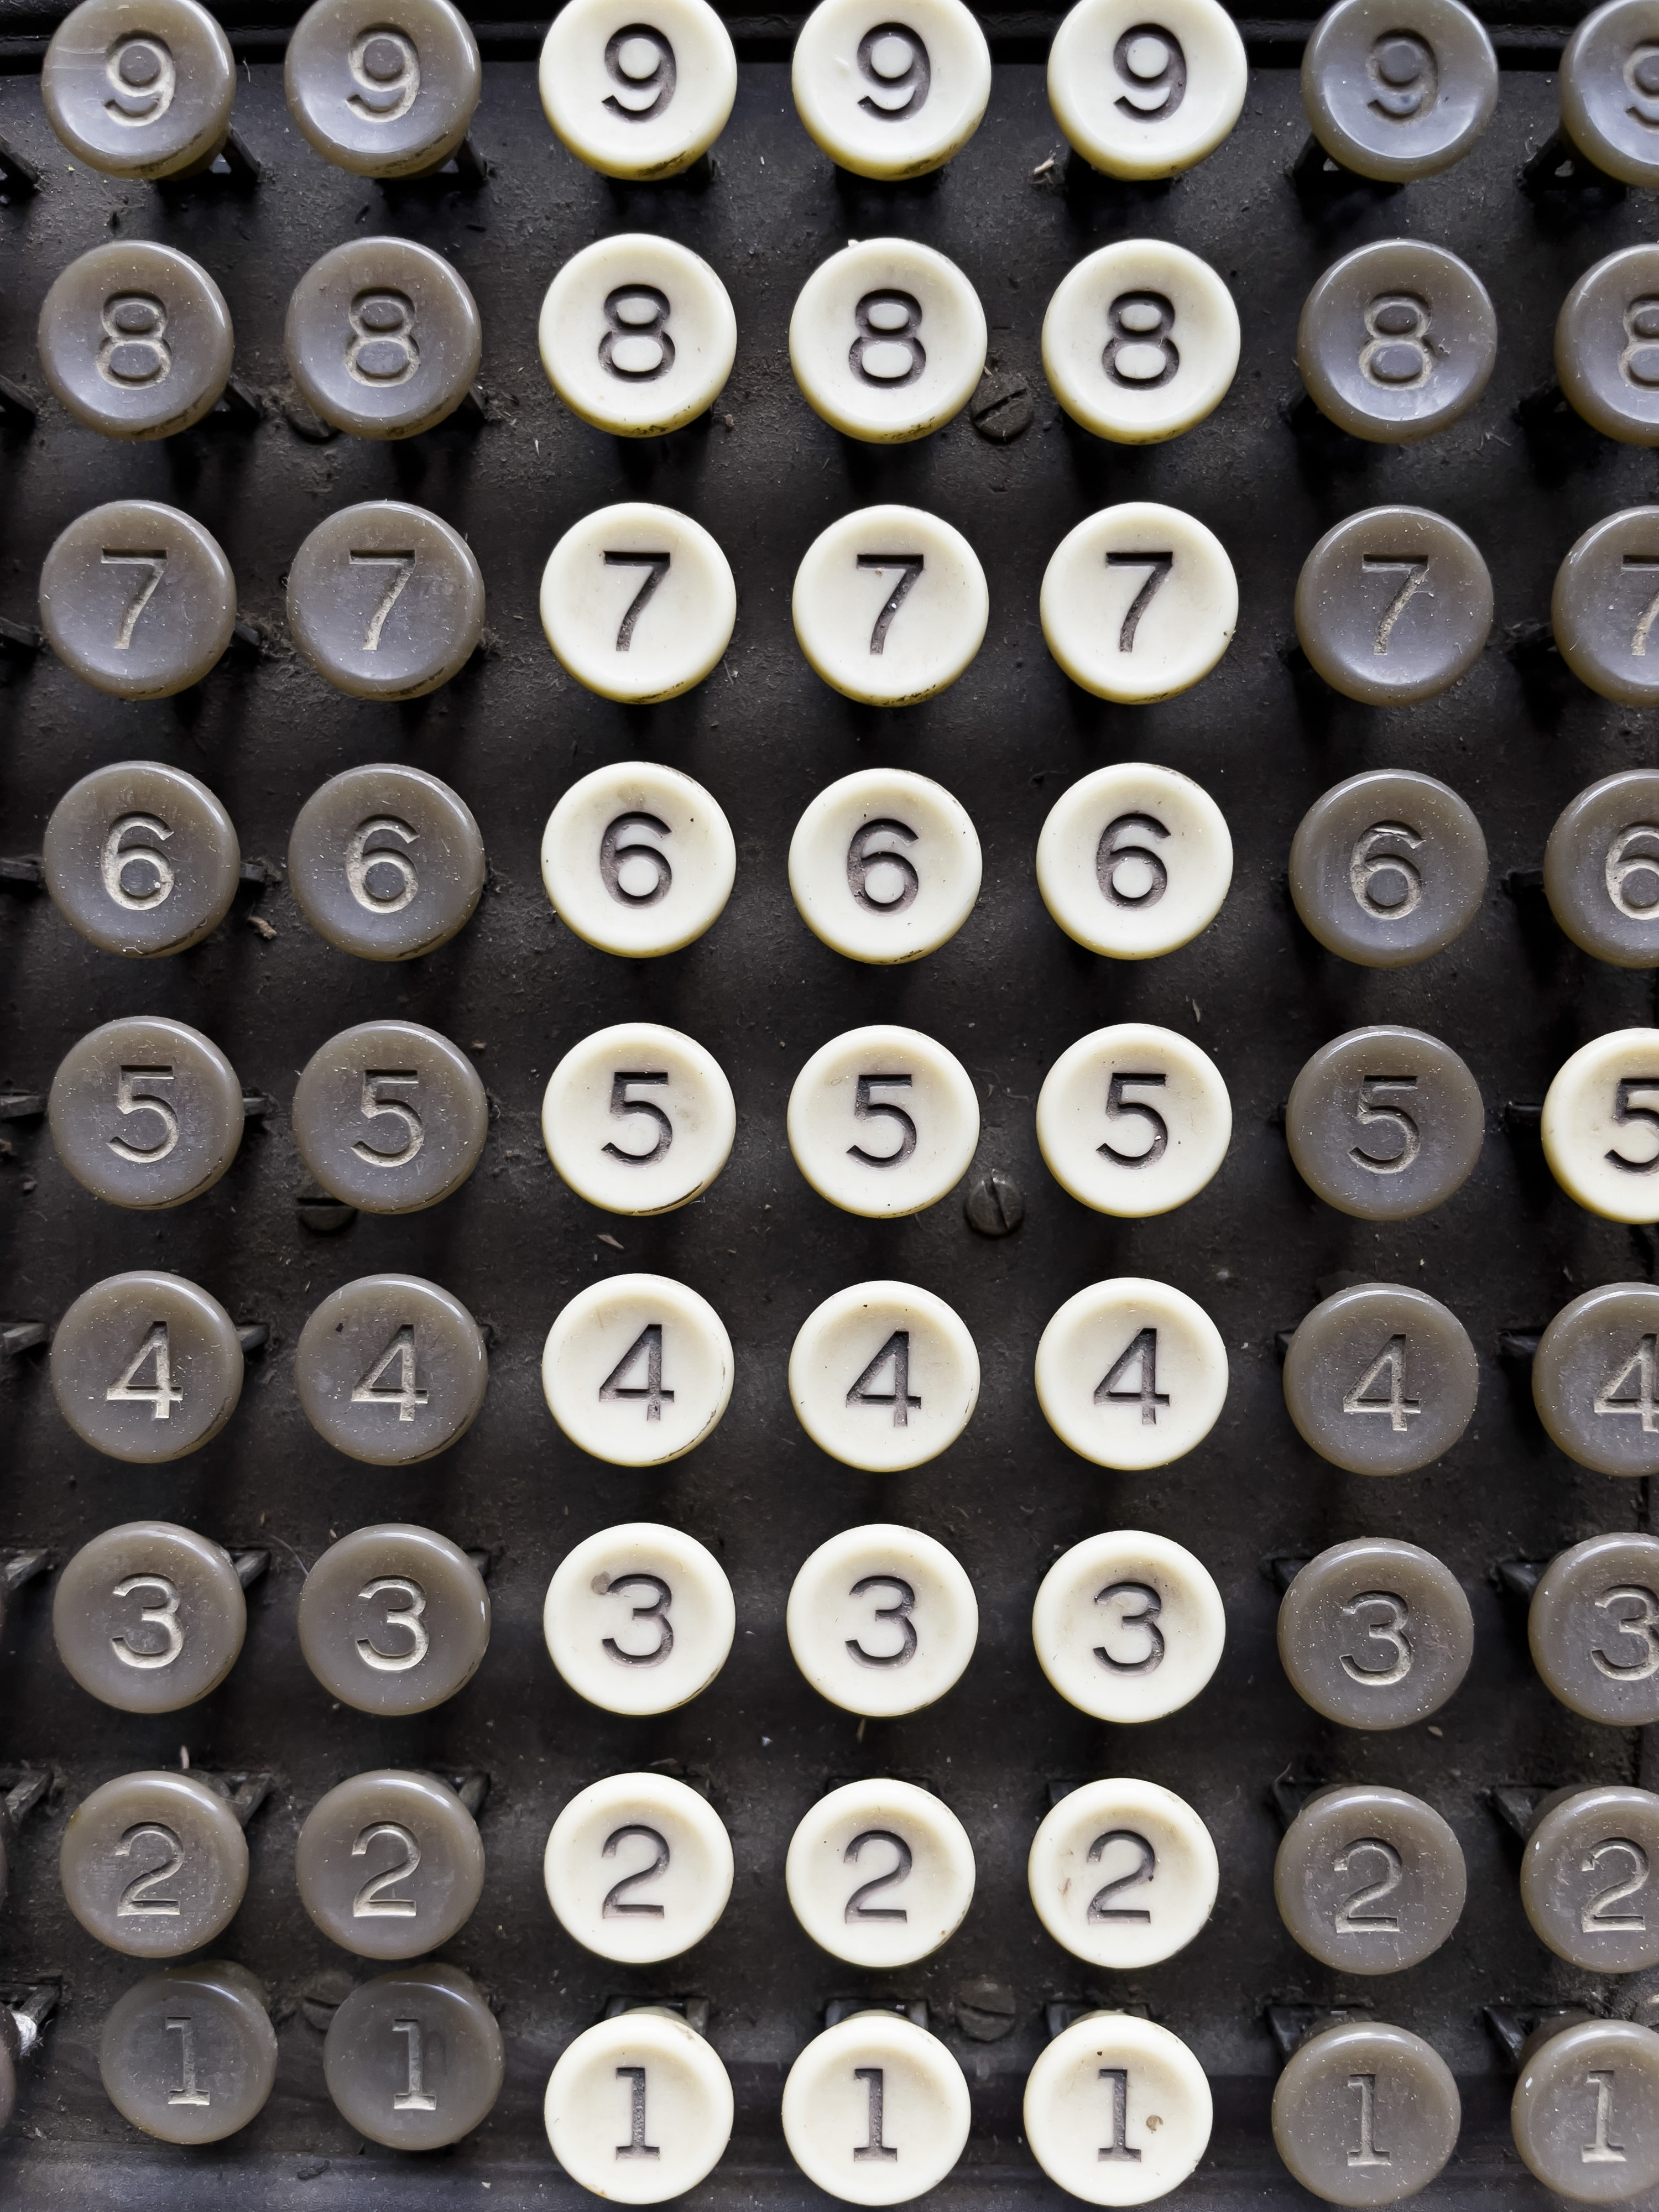 Numbered keys on a machine